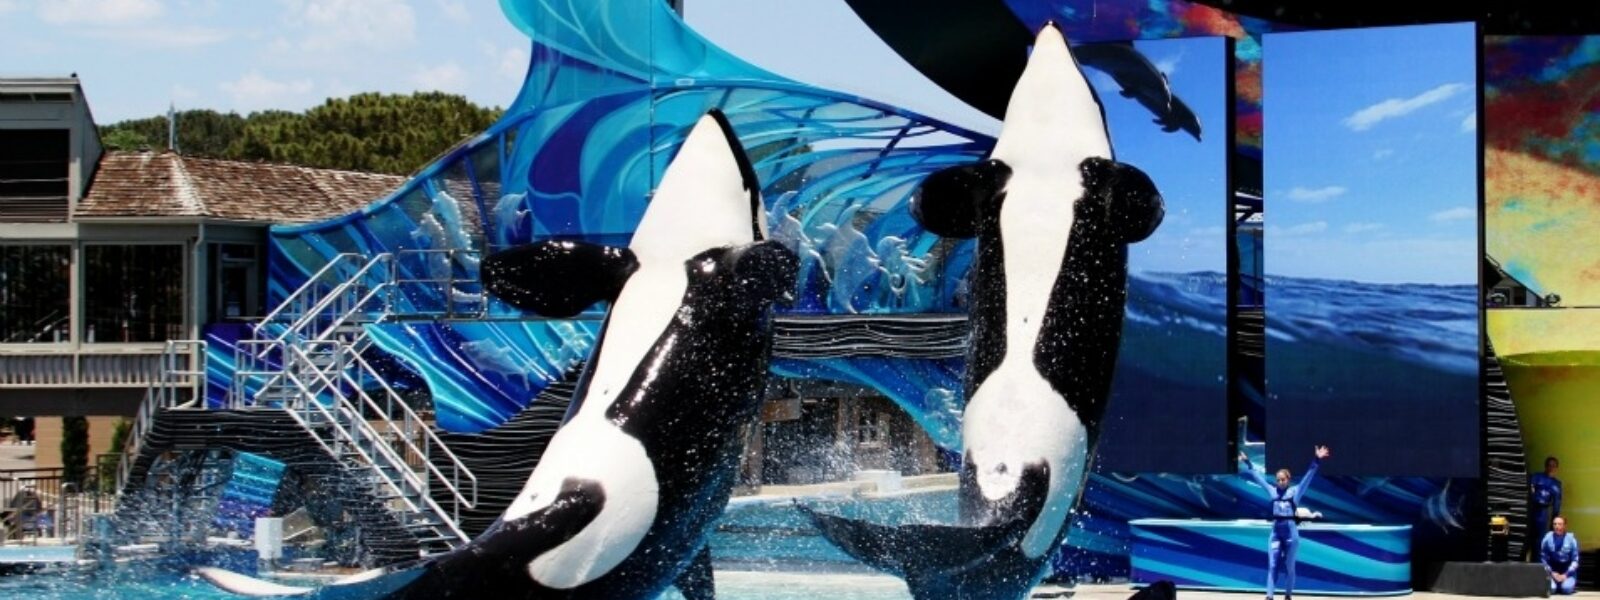 Orcas performing at SeaWorld. (Photo: C./flickr/cc)